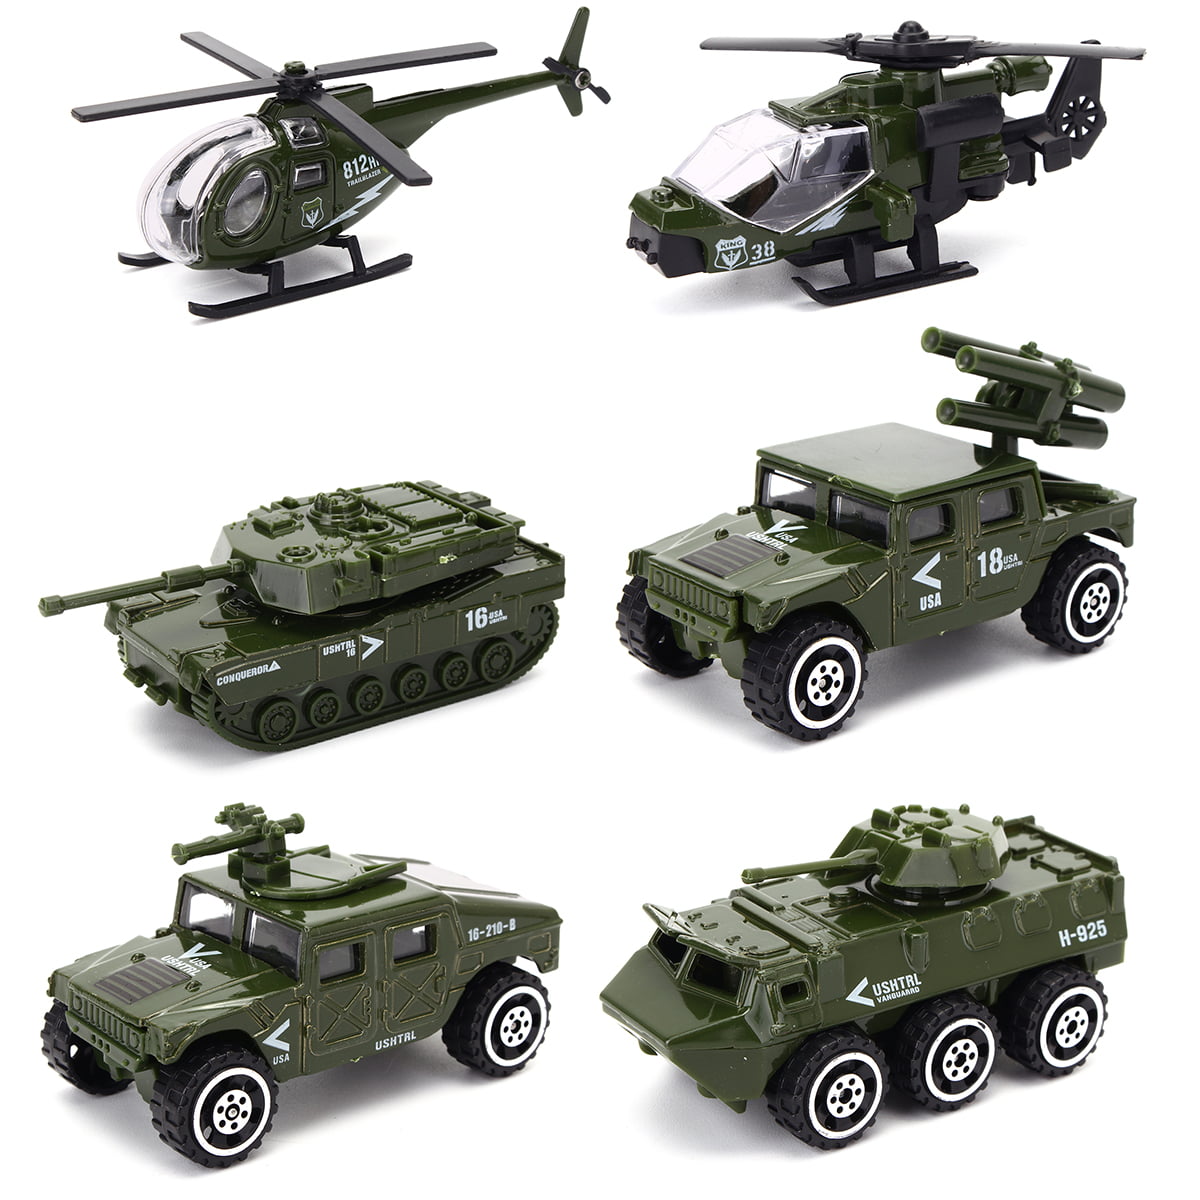 Set of 6 Military Vehicle Helicopter Tank Model Diecast Miniature Toy Kids Gift 